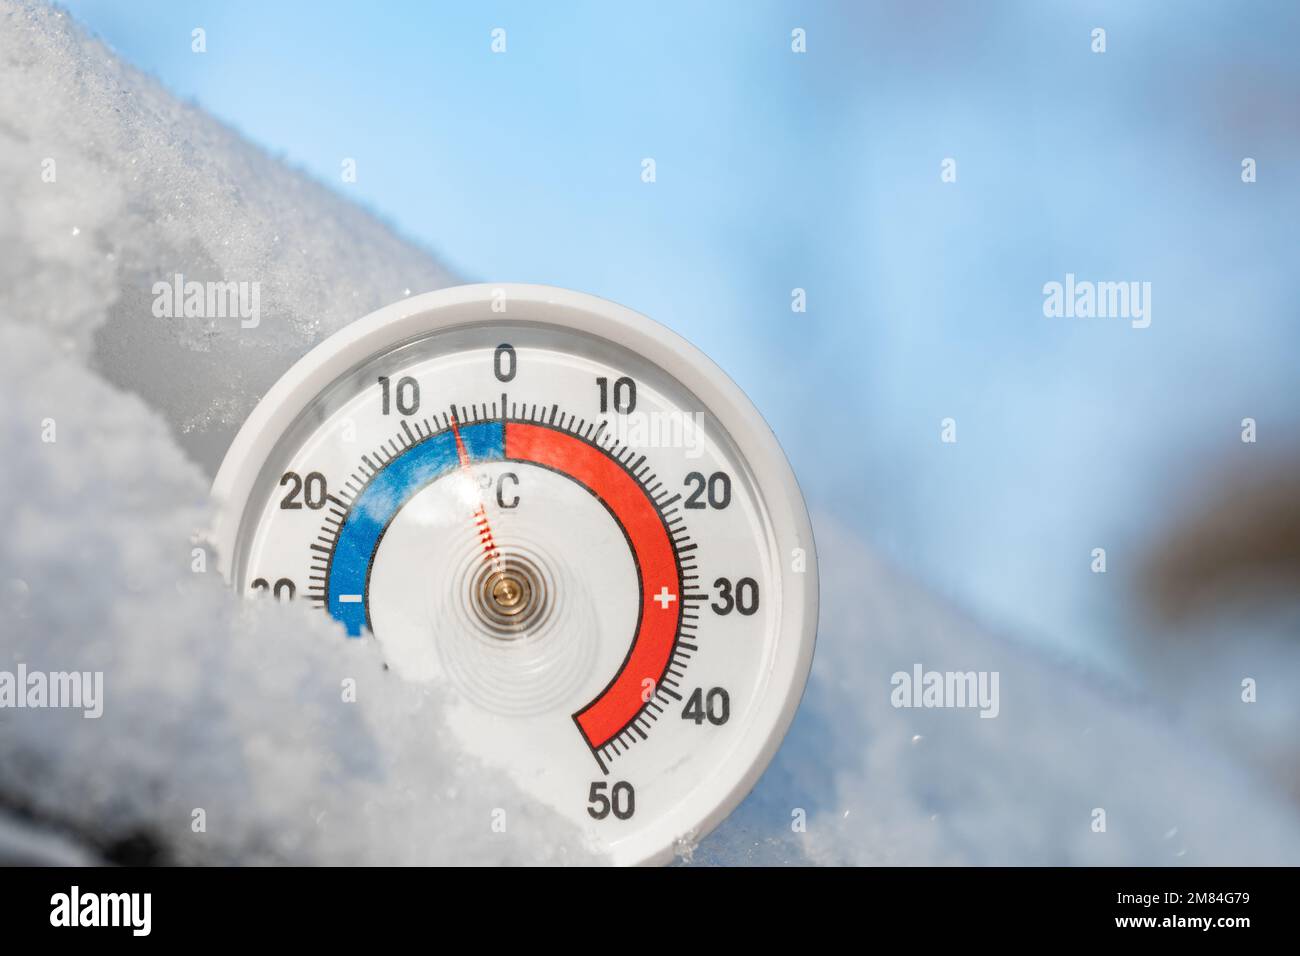 Thermometer with celsius scale in the snow showing minus 4 degree ambient temperature - winter weather concept Stock Photo